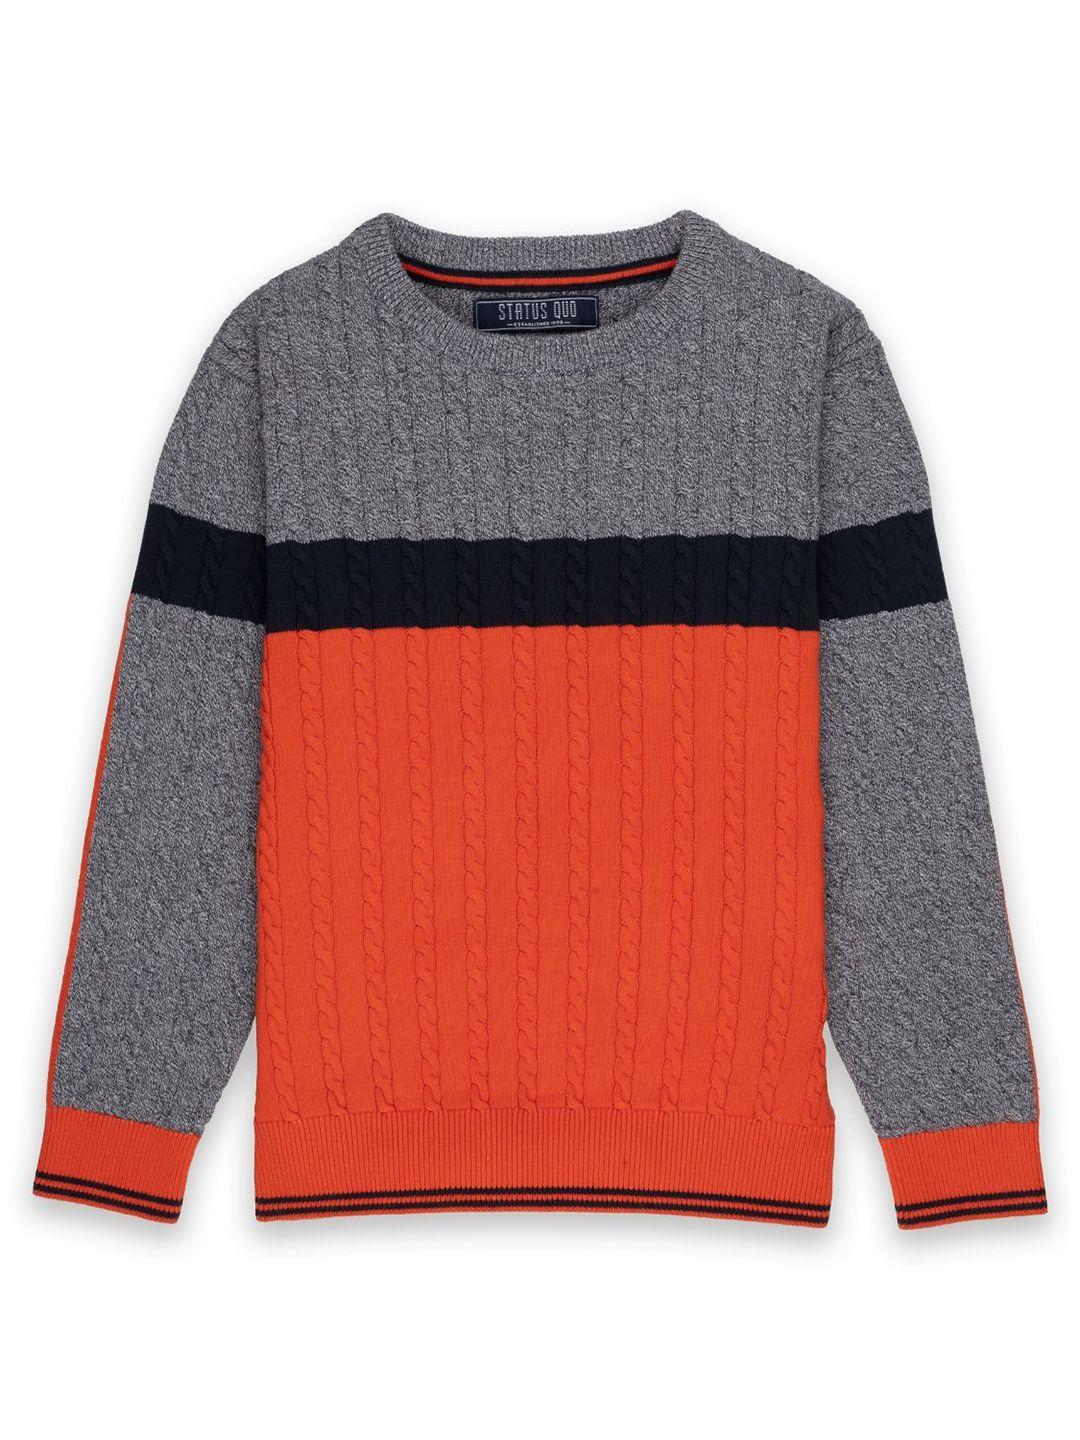 status-quo-boys-navy-blue-&-orange-cable-knit-colourblocked-pullover